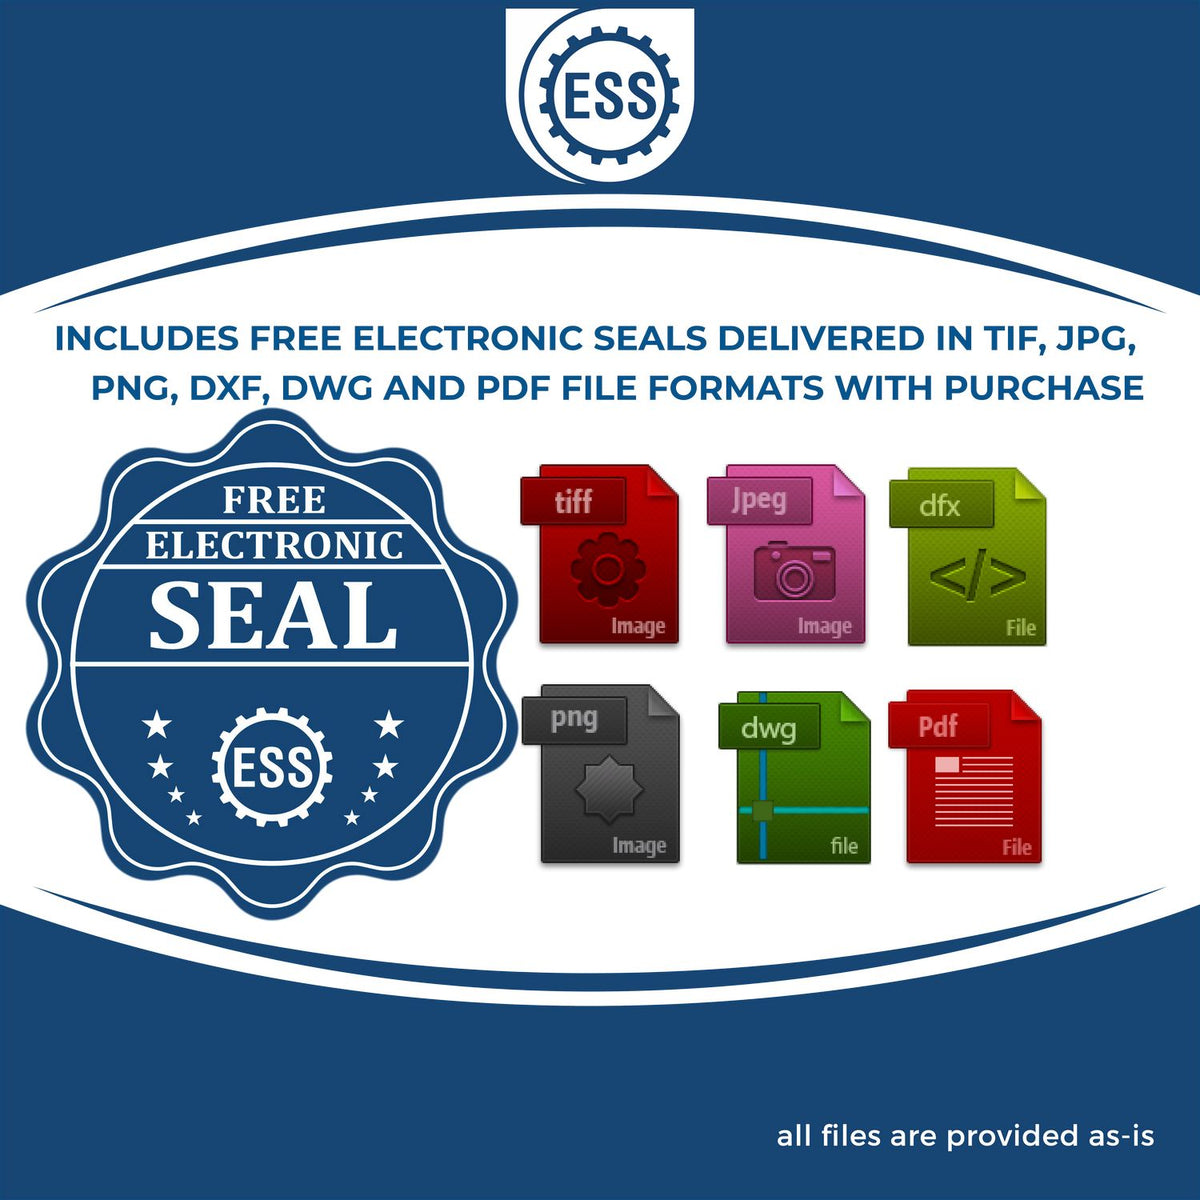 An infographic for the free electronic seal for the Long Reach Pennsylvania PE Seal illustrating the different file type icons such as DXF, DWG, TIF, JPG and PNG.